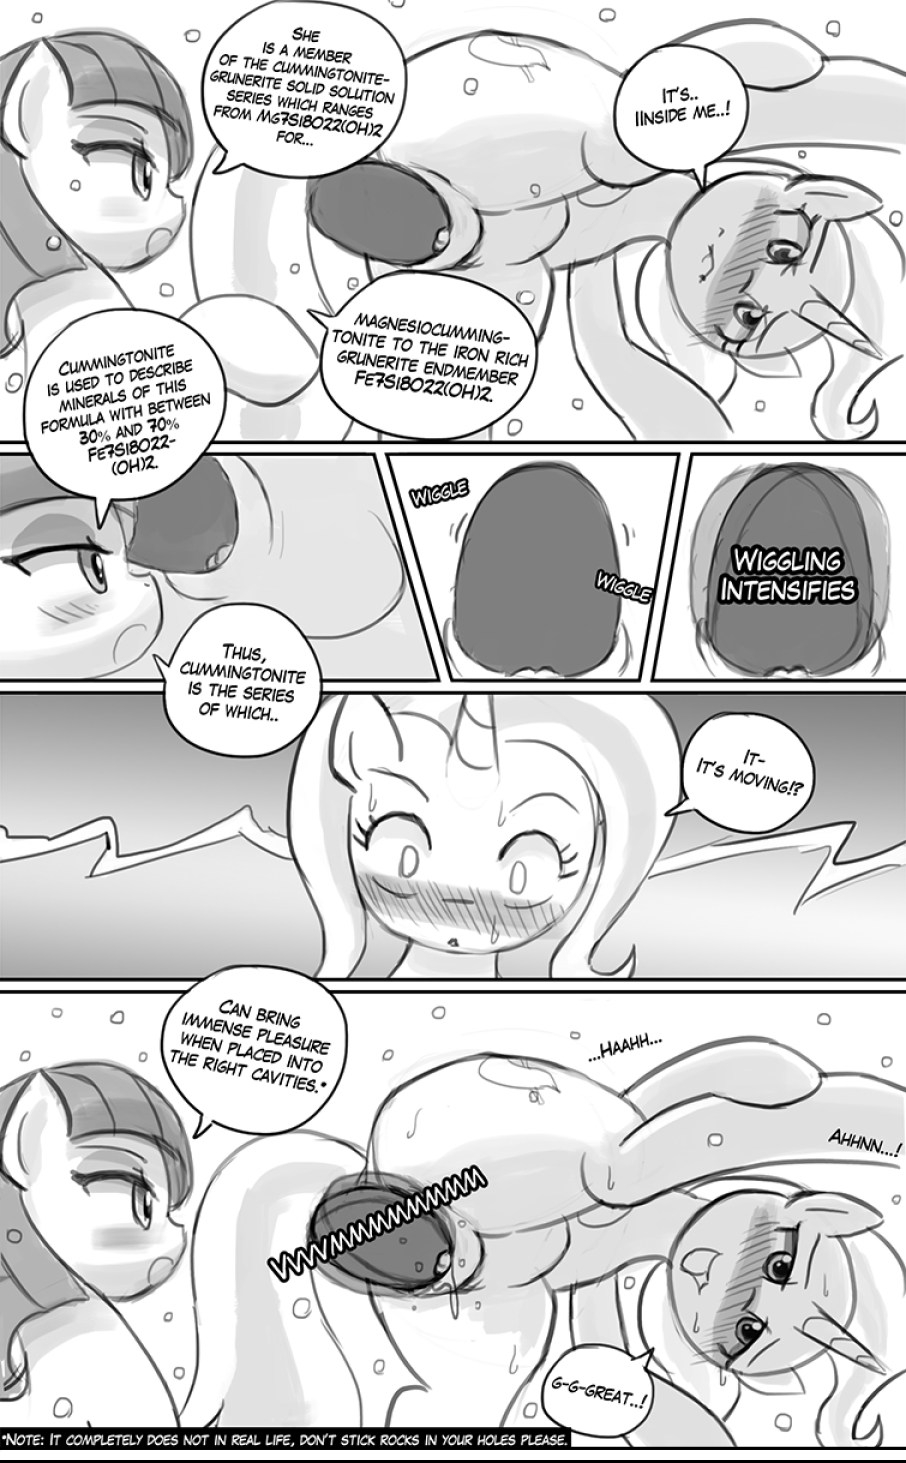 Homesick pt2: a hearths warming eve porn comic picture 15